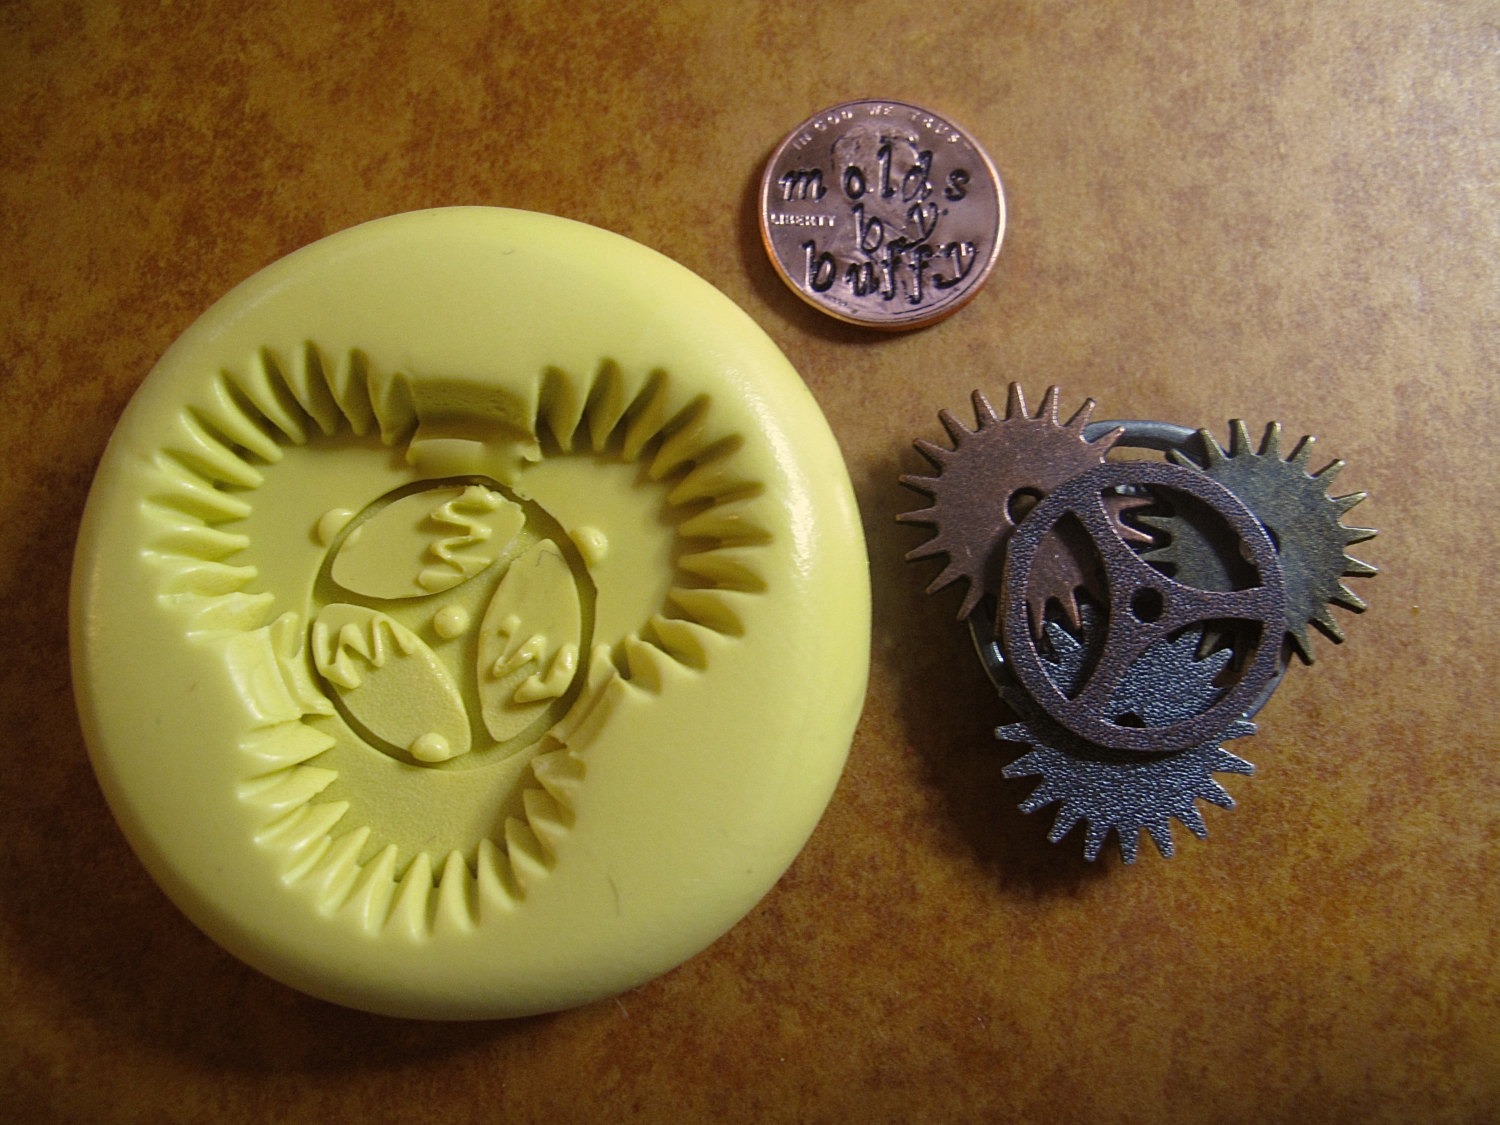 STEAMPUNK gears SILICONE flexible mold, resin mold, food mold, pmc mold, jewelry mold, crayon mold, fondant mold steampunk buy now online